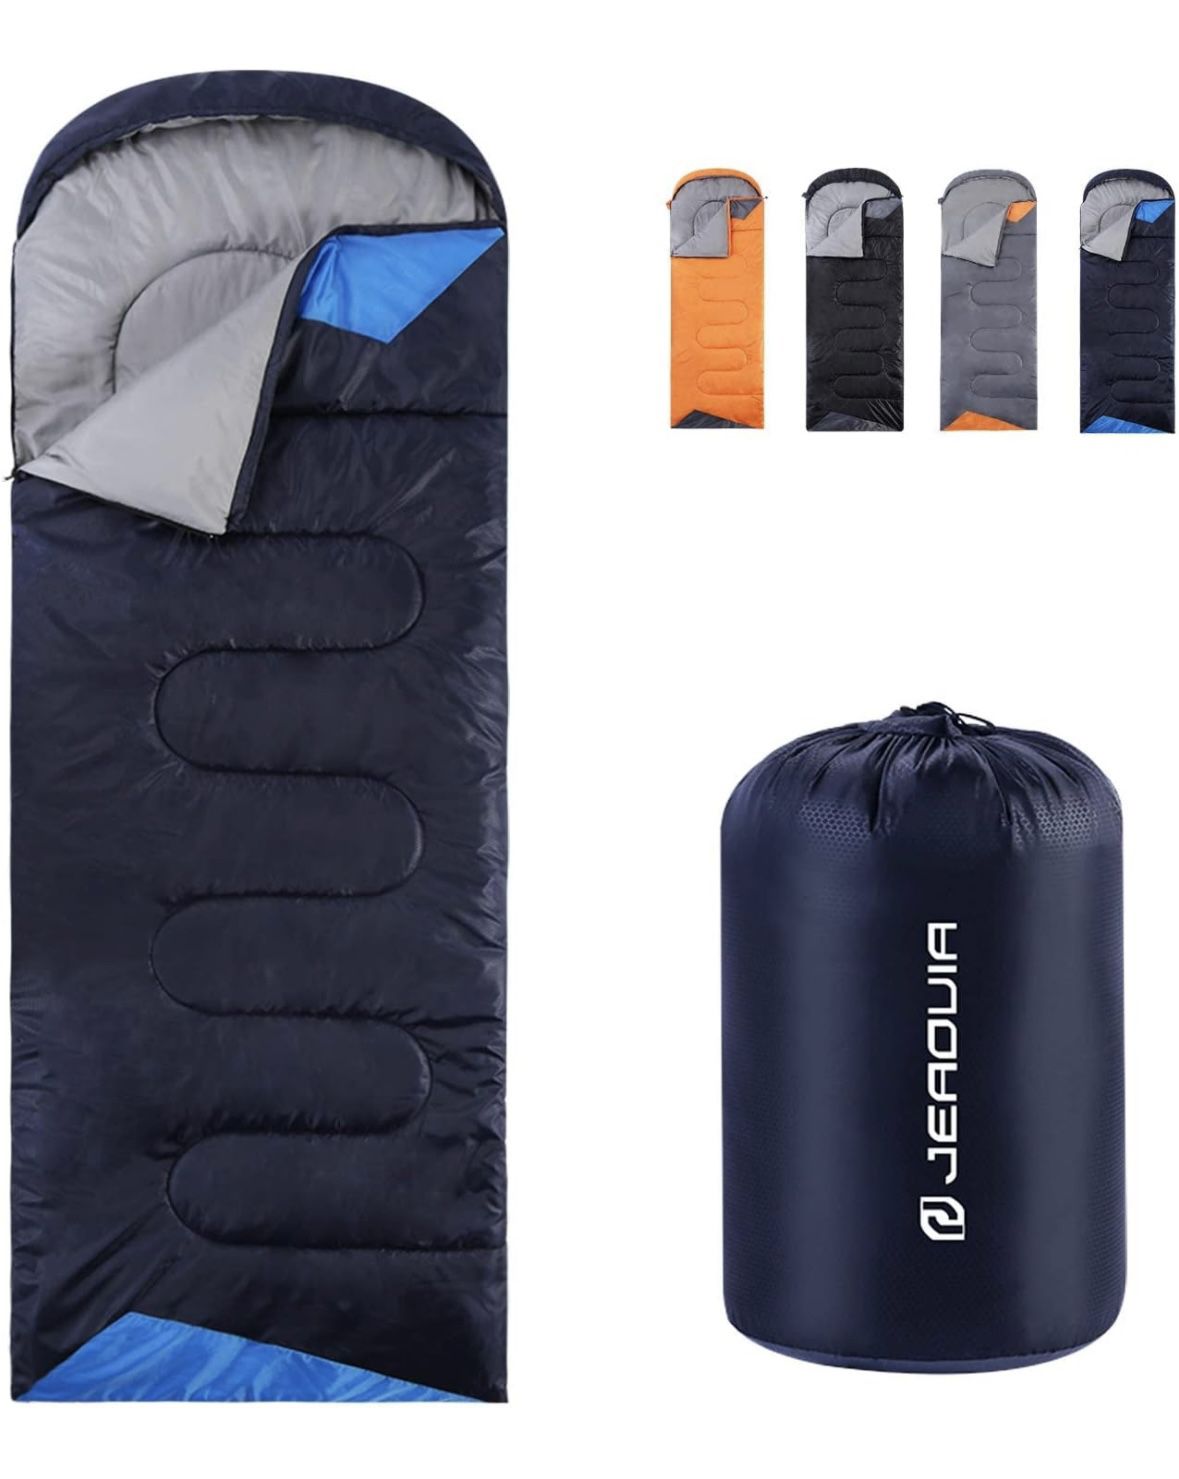 Waterproof Sleeping Bag for Girls Boys Adults Warm, Cold Camping Hiking Outdoor Travel Hunting